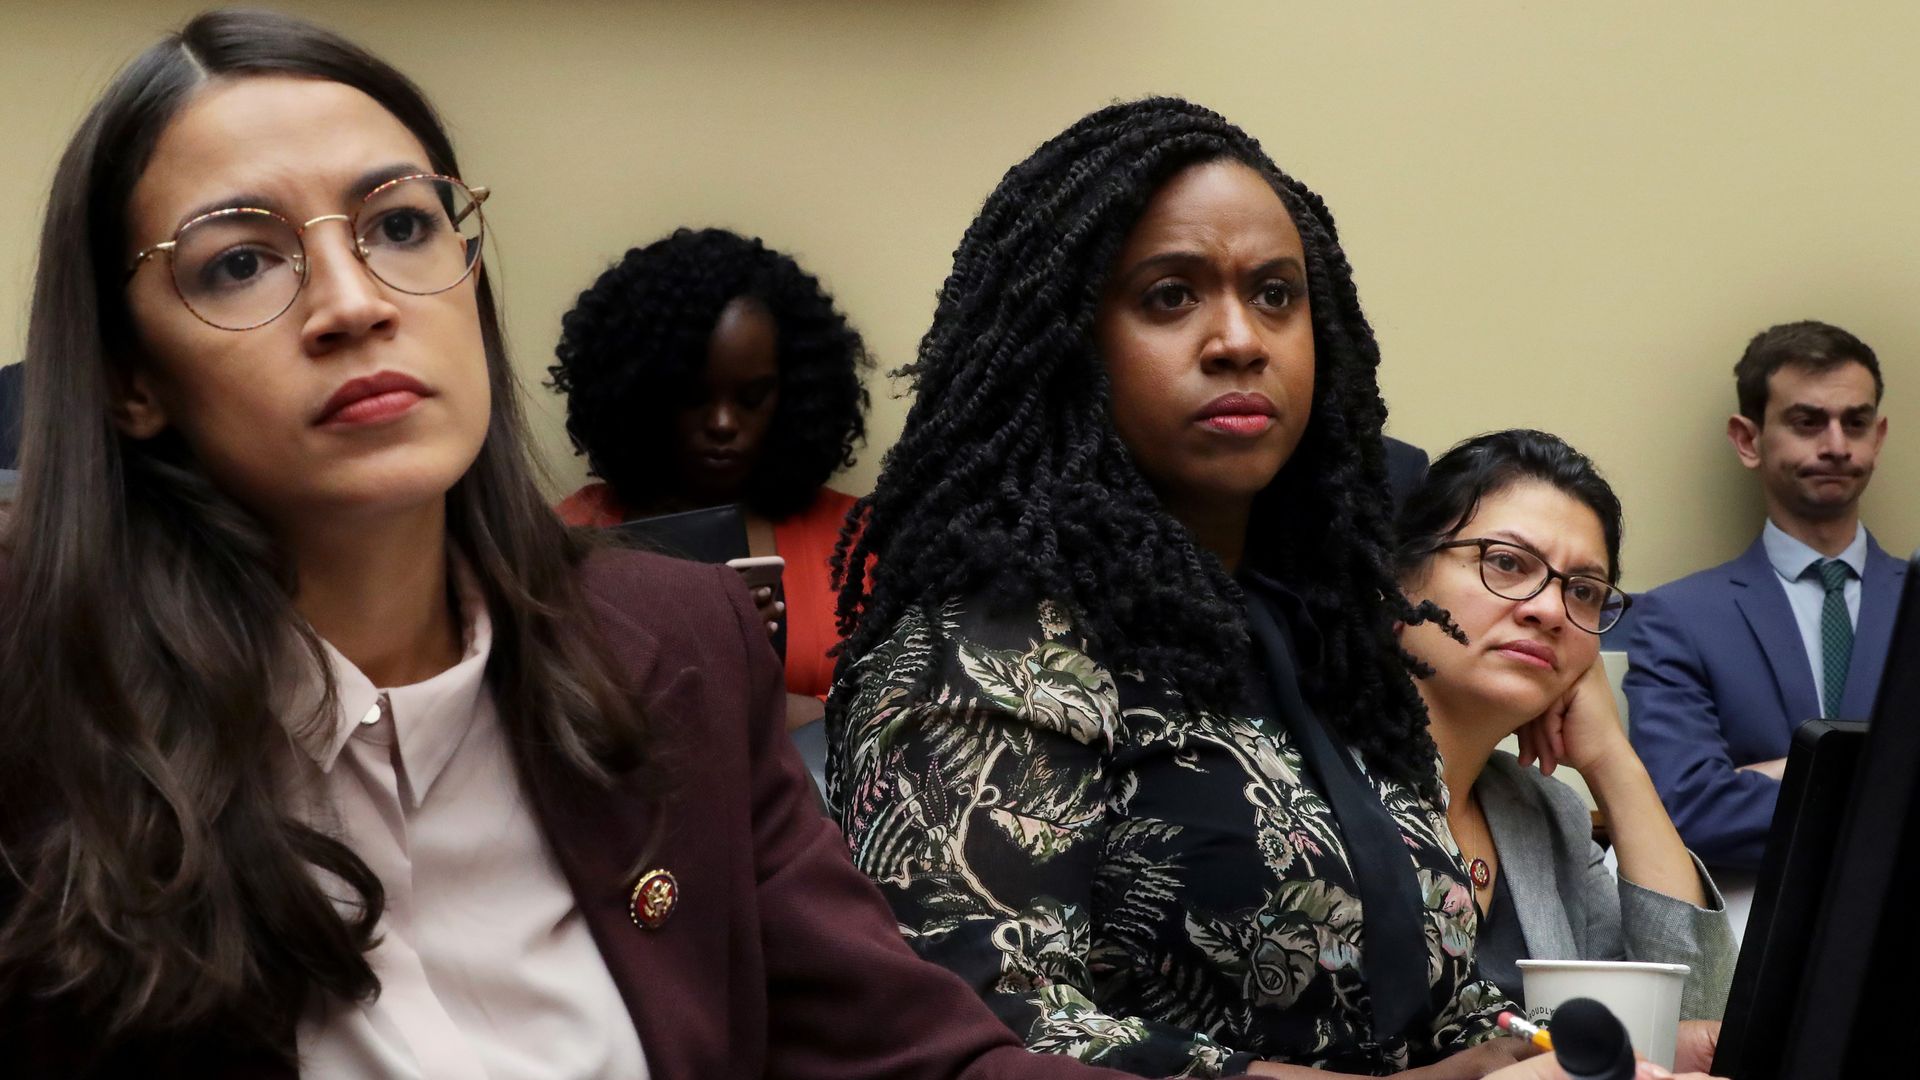 Three-fourths of The Squad are seen listening to testimony during a congressional hearing.